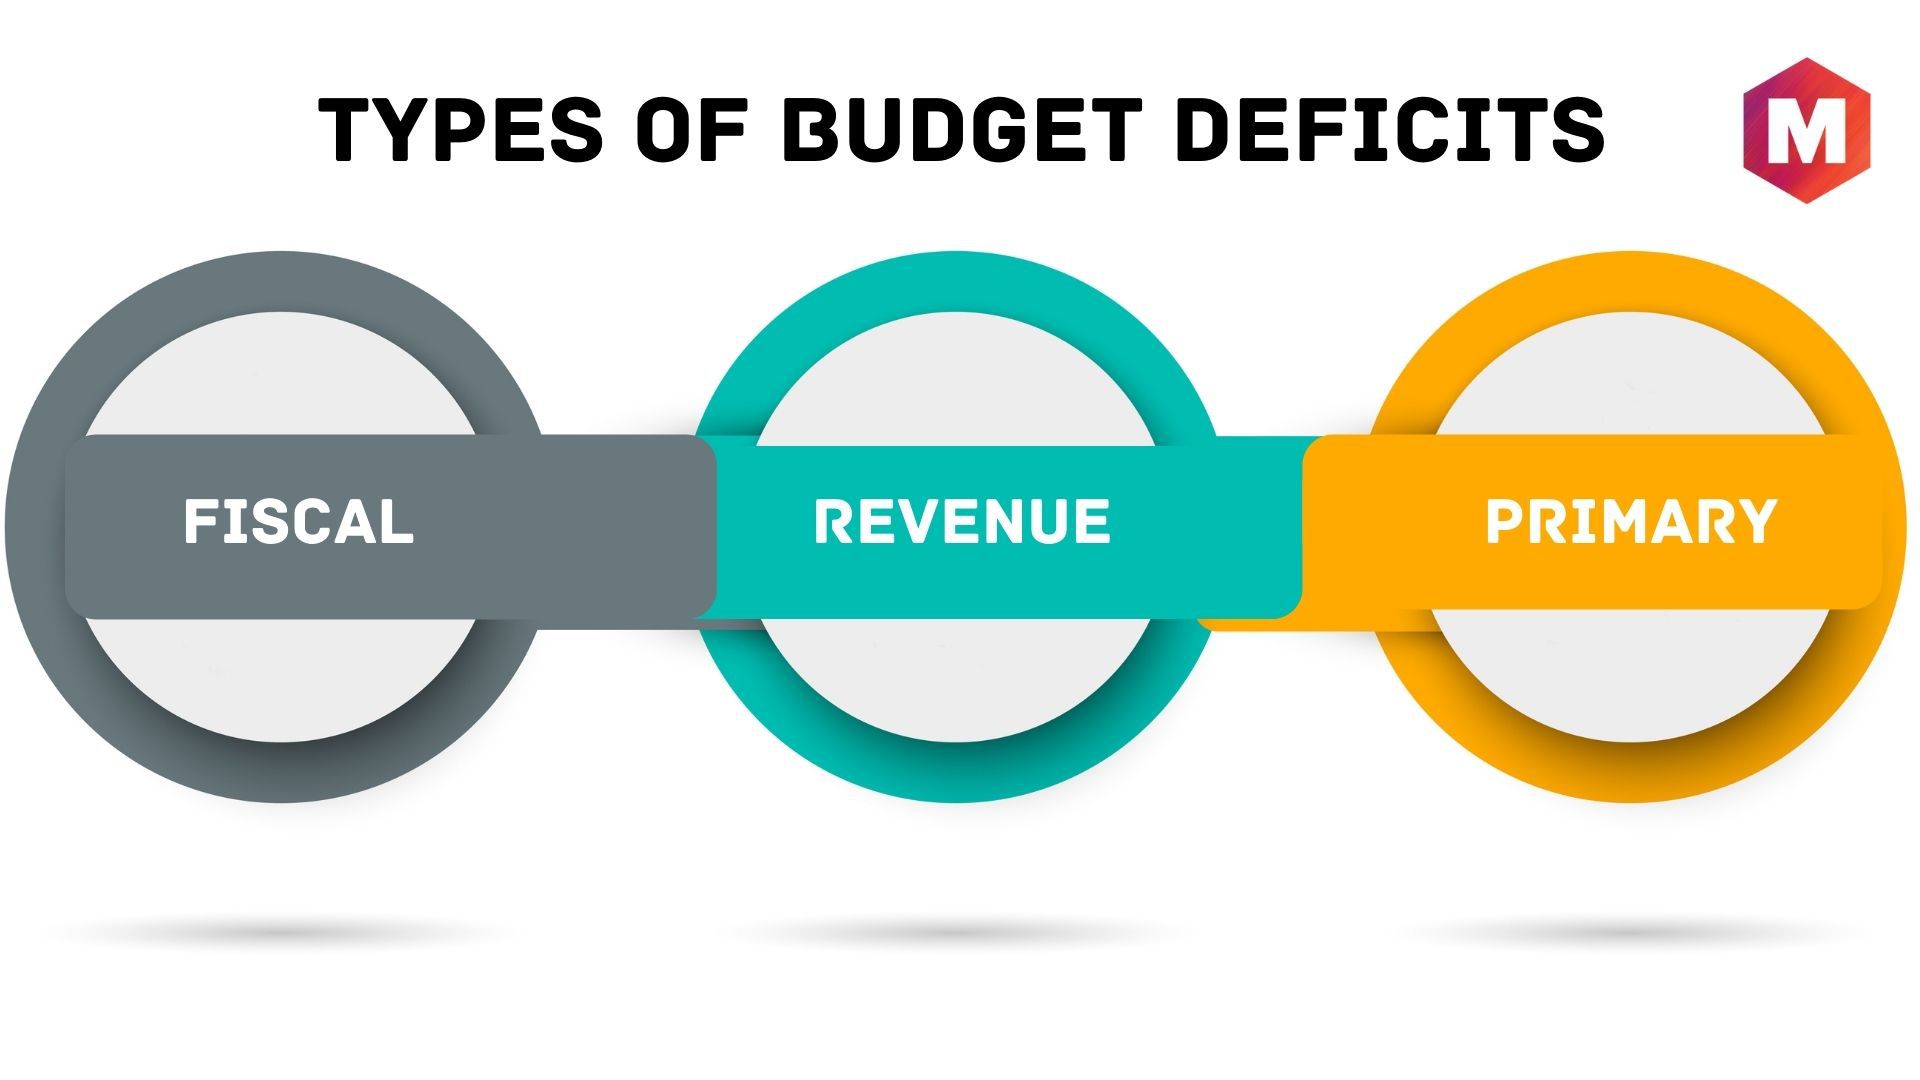 Types of Budget Deficits